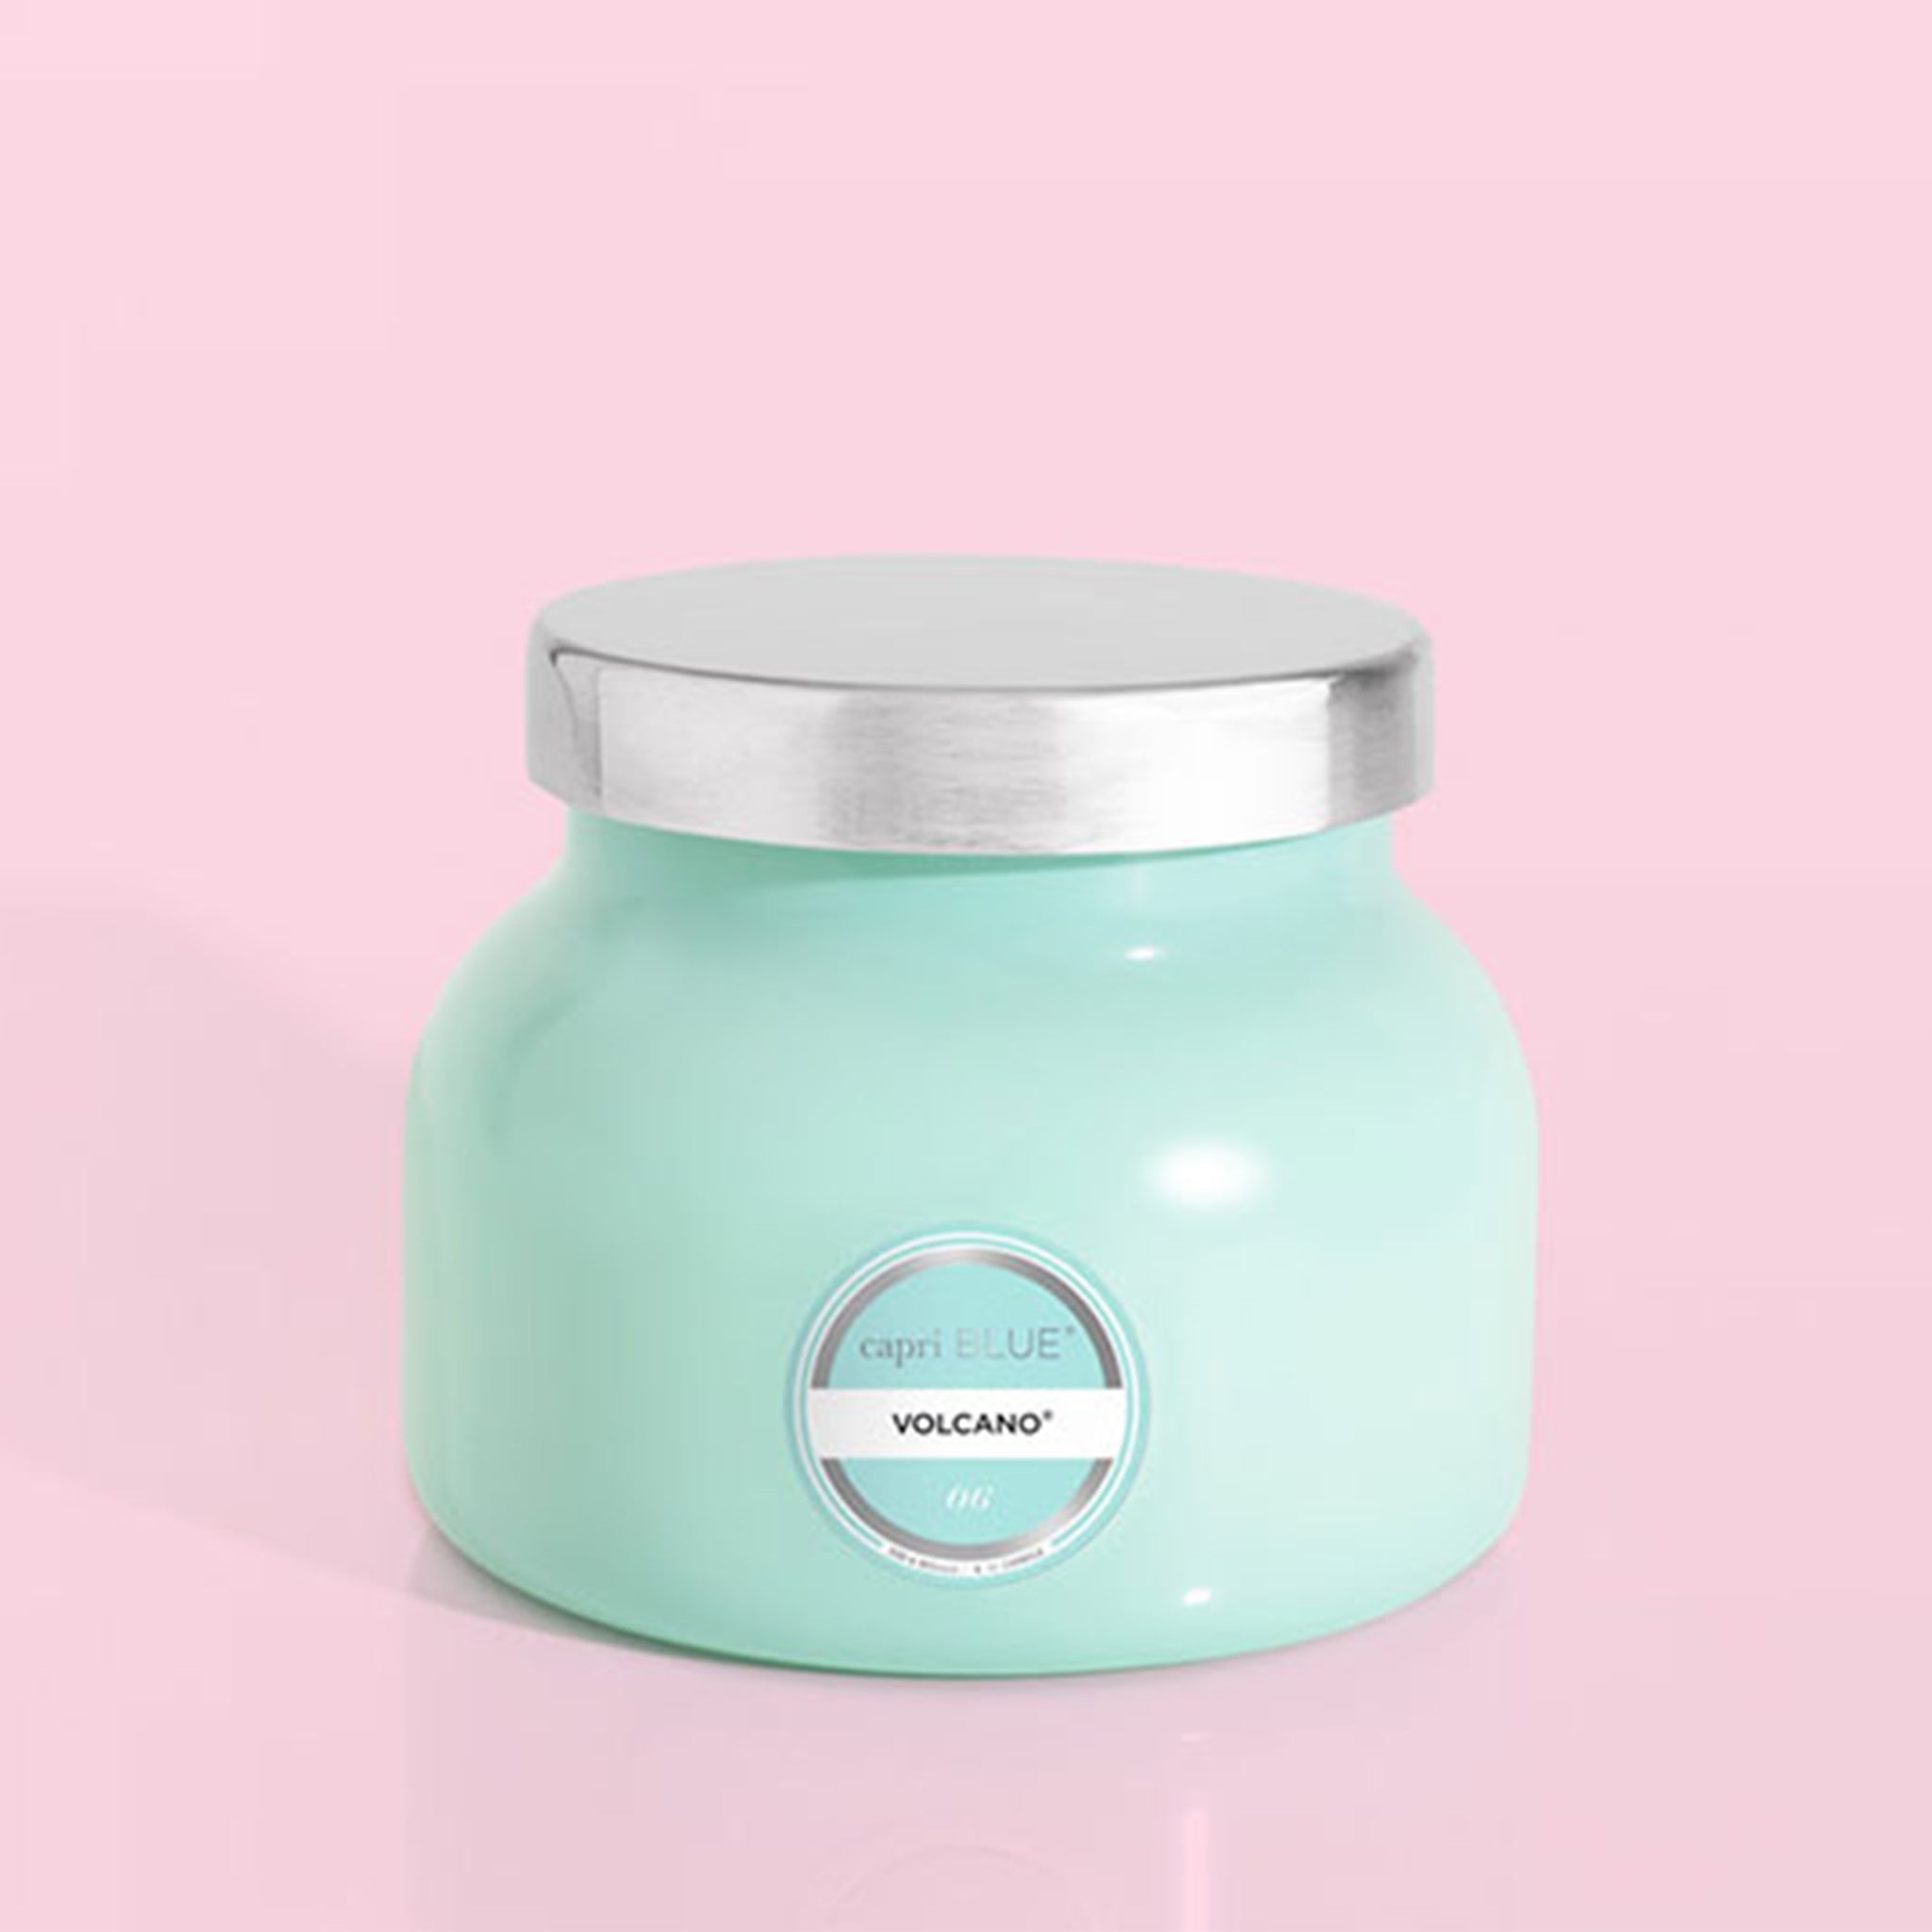 On a pink background is the smaller version of the aqua blue glass jar candle with a silver lid on top.